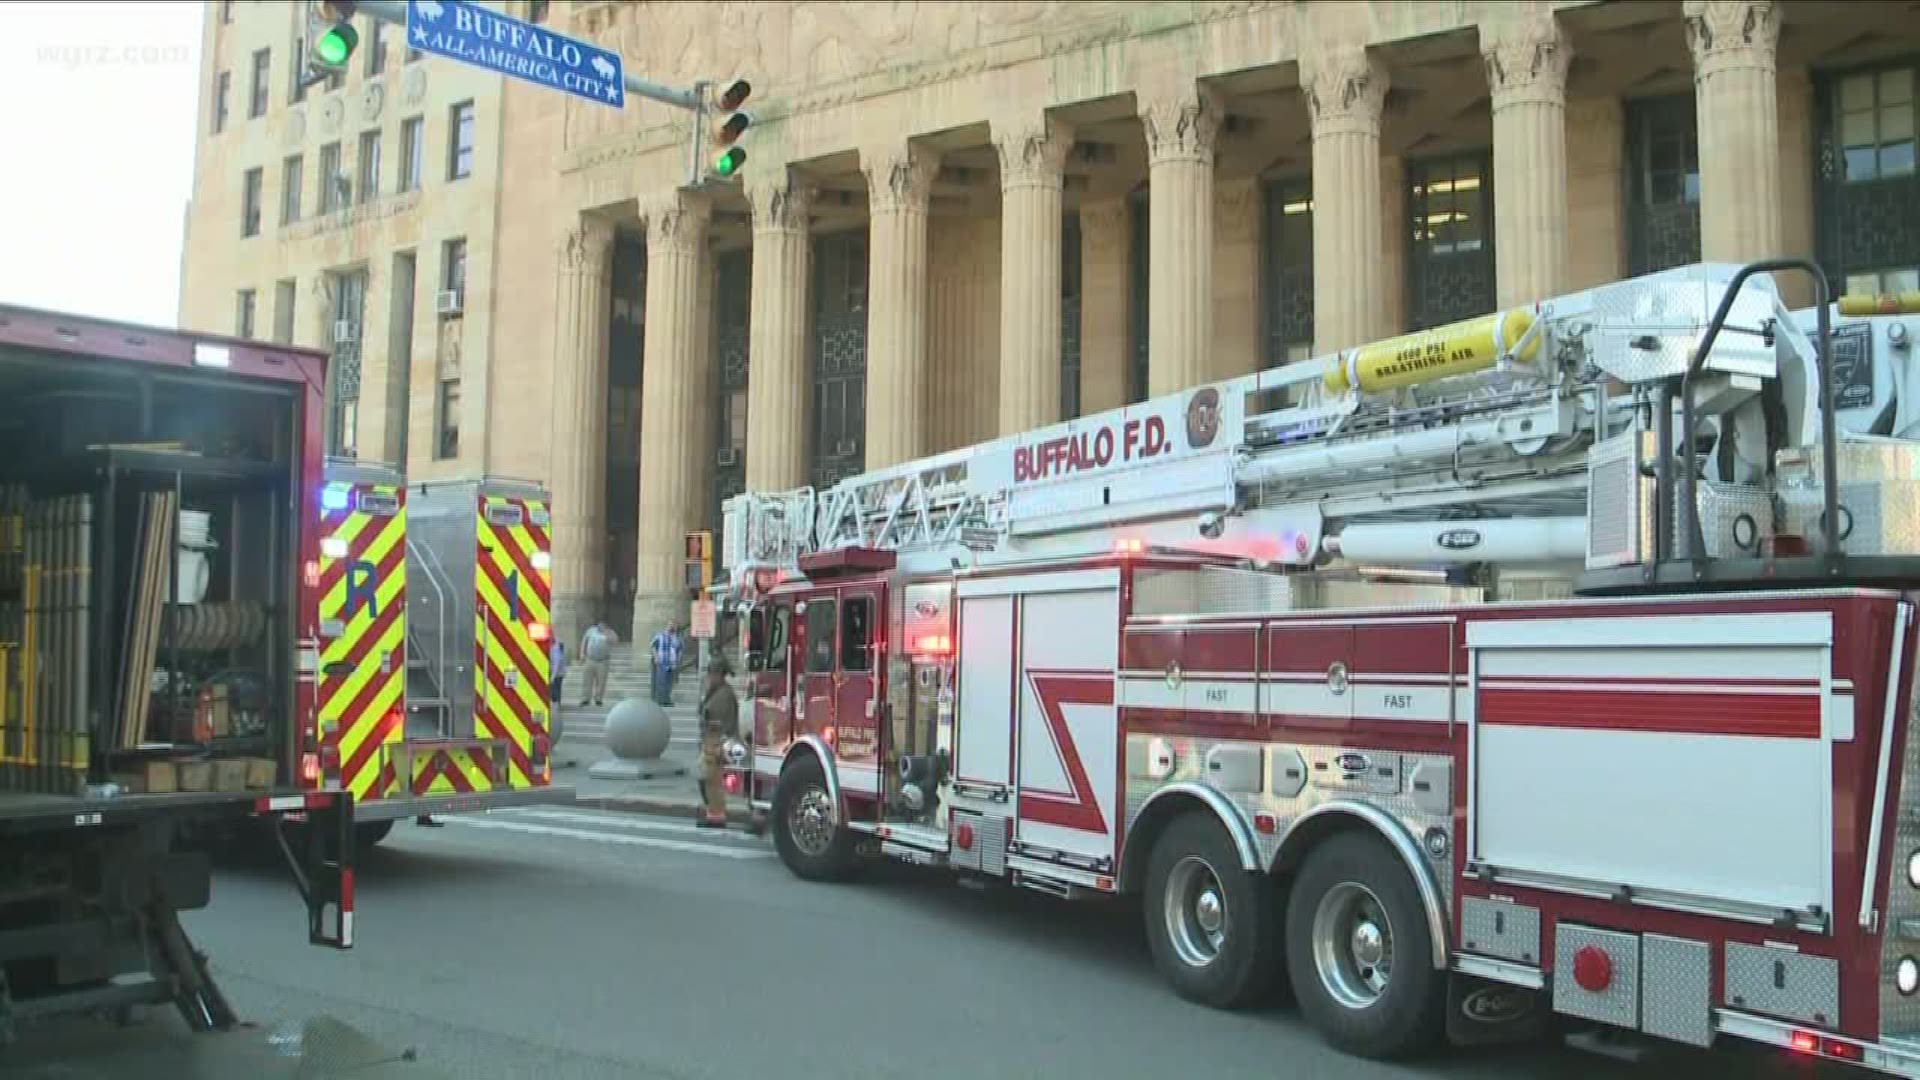 Two people rescued from elevator at city hall